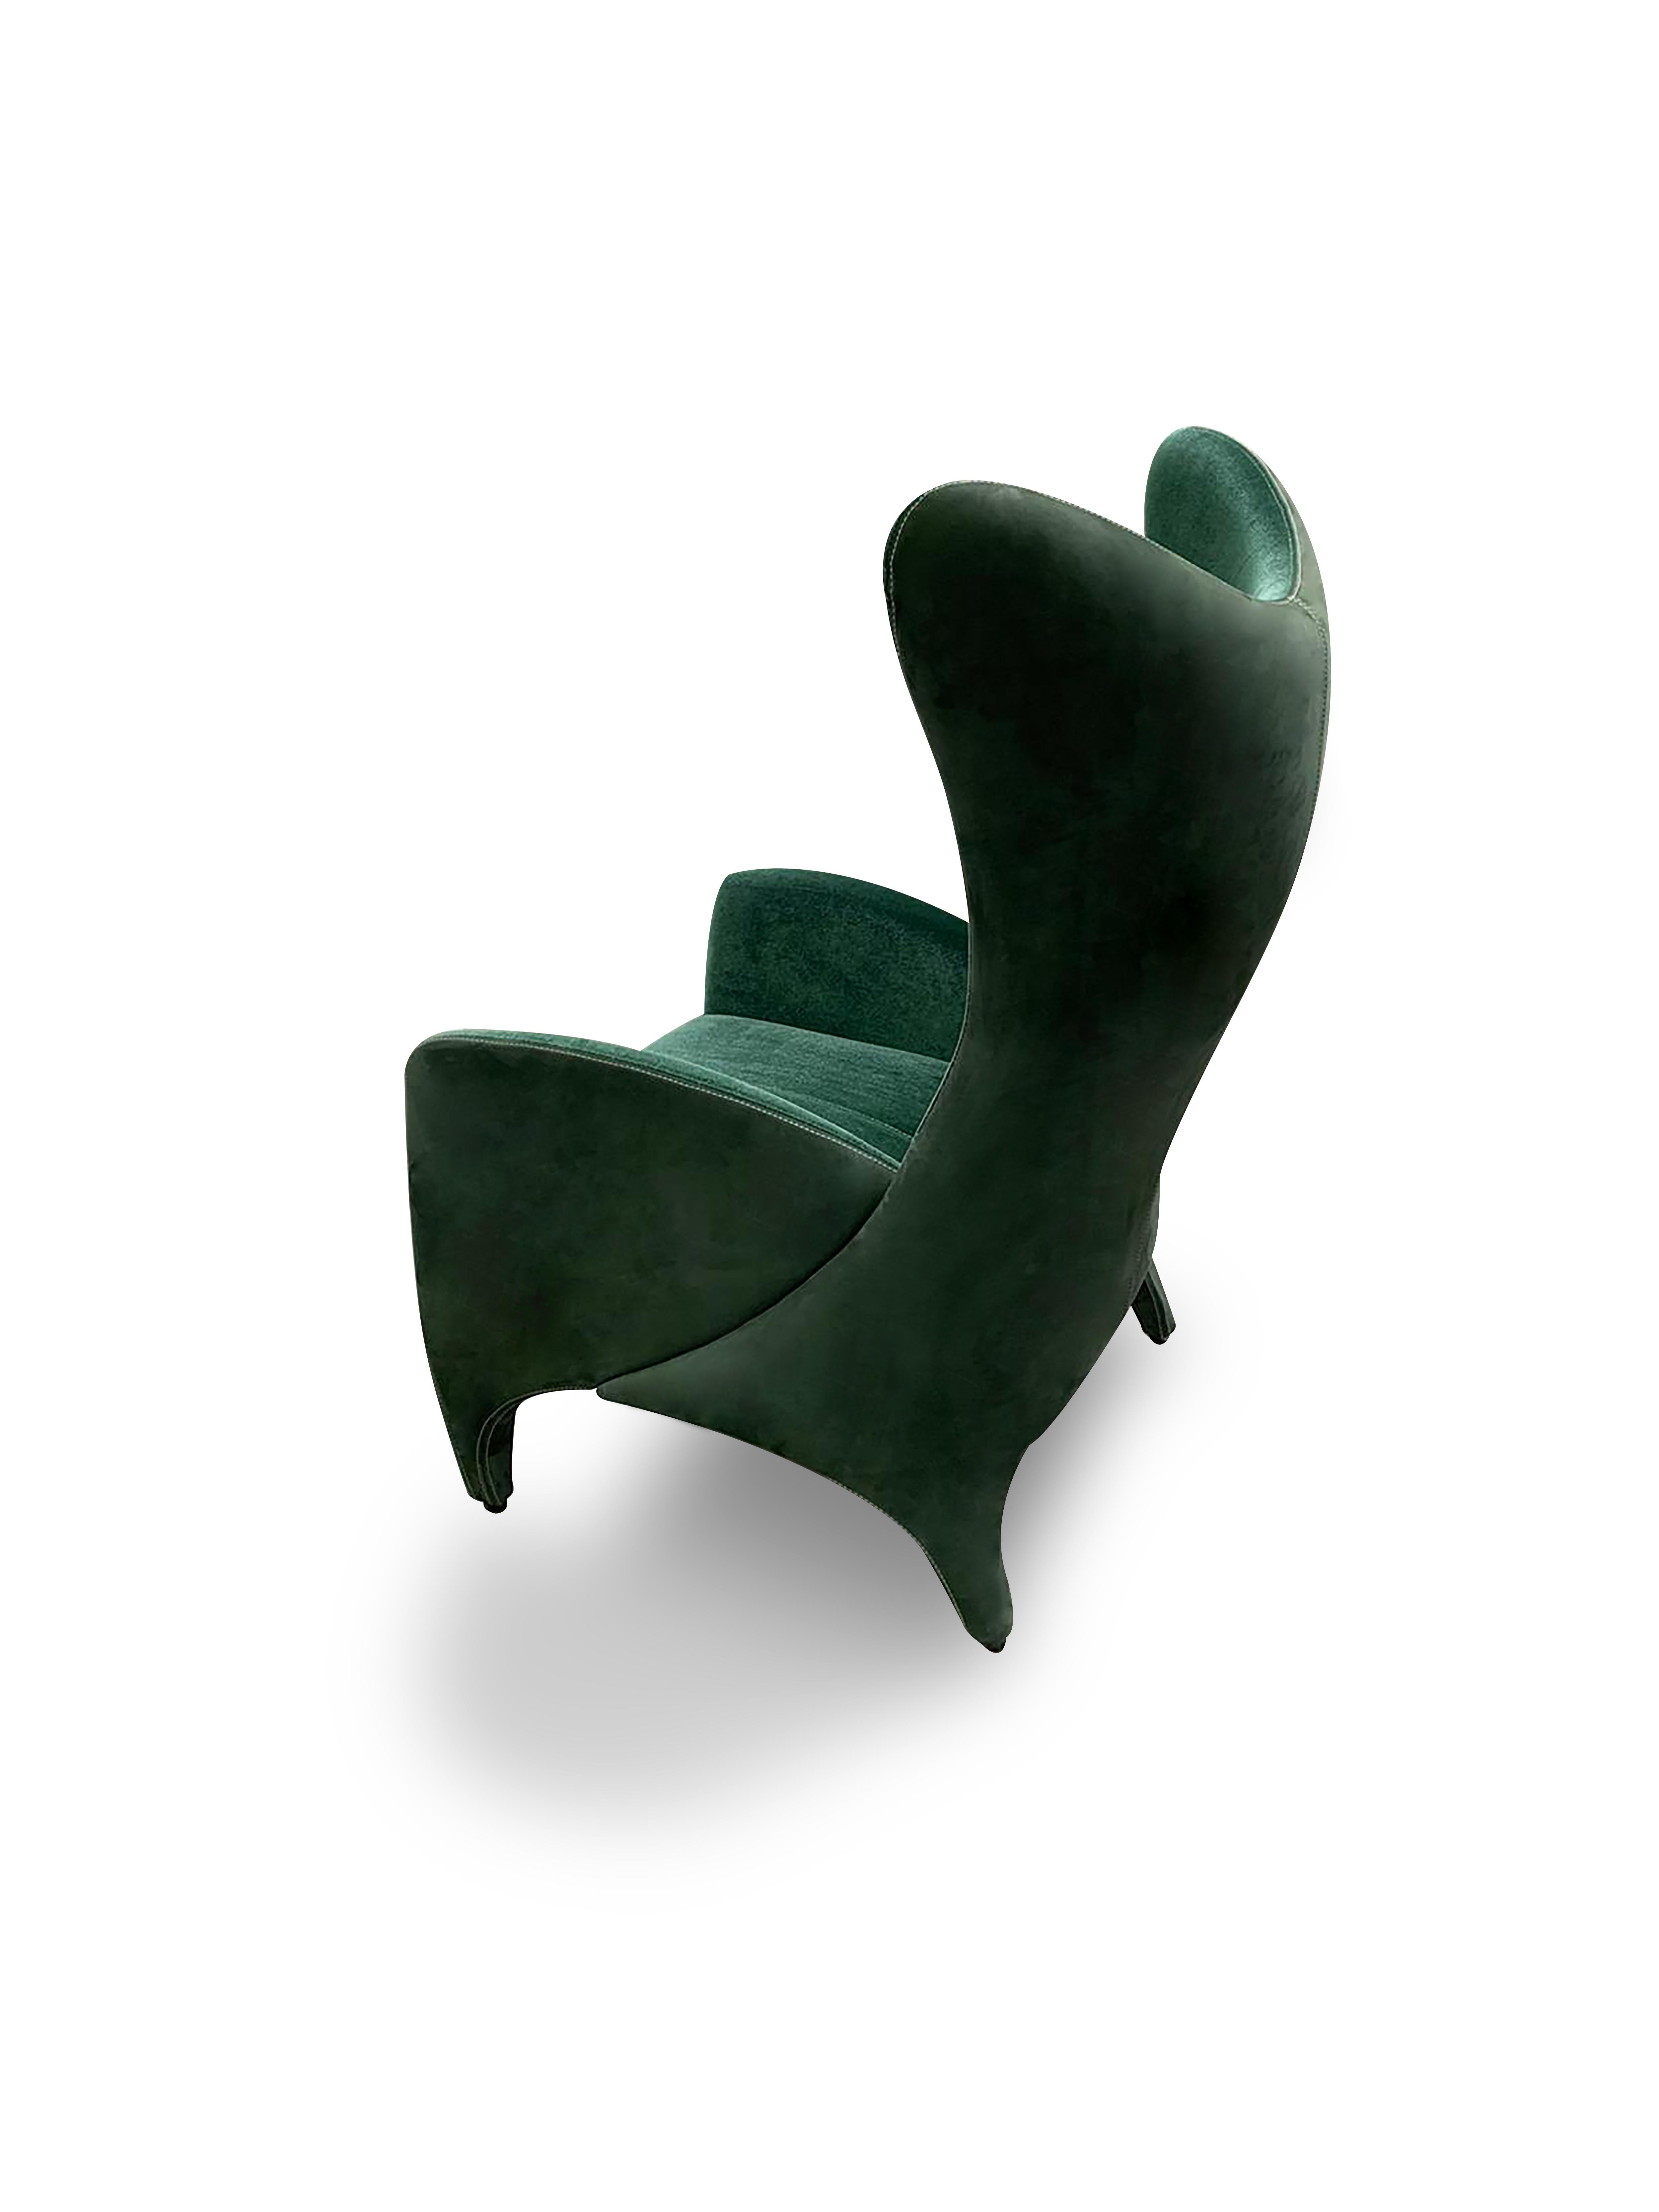 The AVI Armchair. Be embraced by this modern twist of the classic wing chair with its soft curves and its comfortable upholstery. Its dynamically shaped silhouette is created by two overlaying organic shells forming the sheltering inside and the